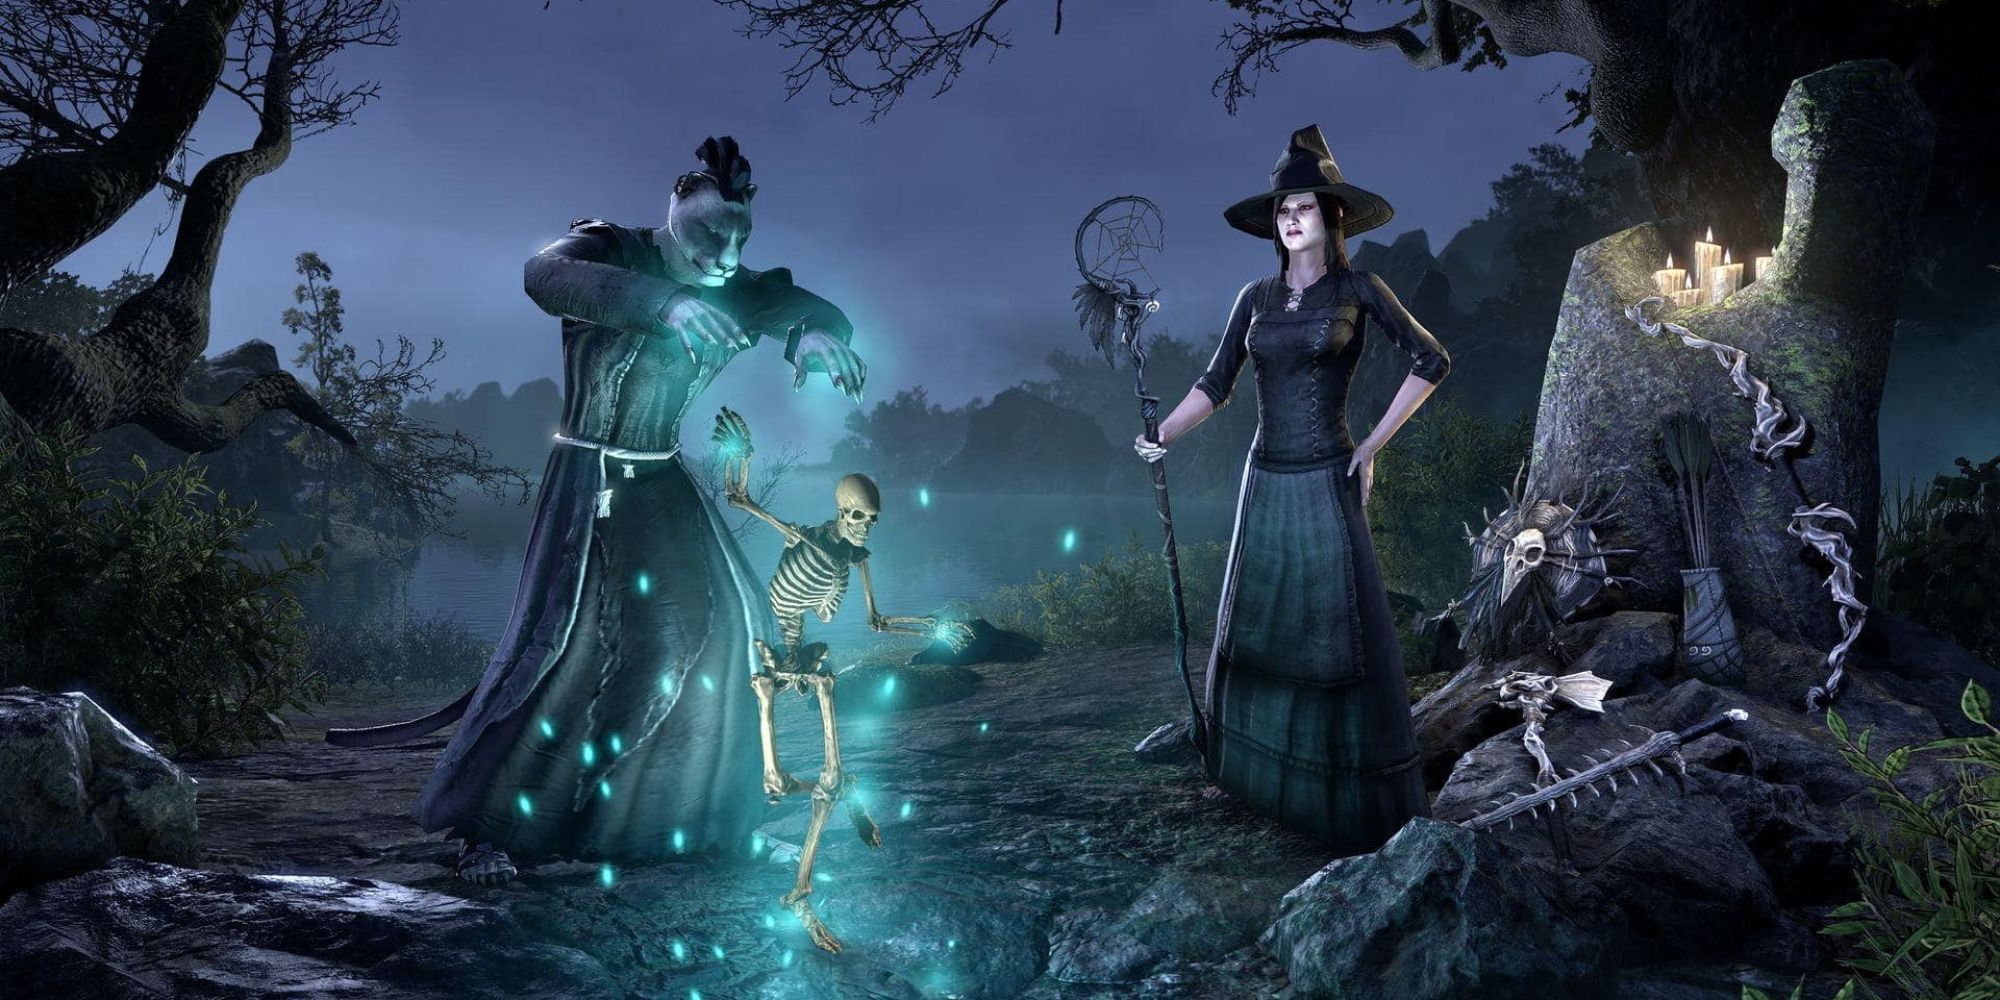 A Khajit making a skeleton dance and a woman with a witches hat watching him in The Elder Scrolls Online